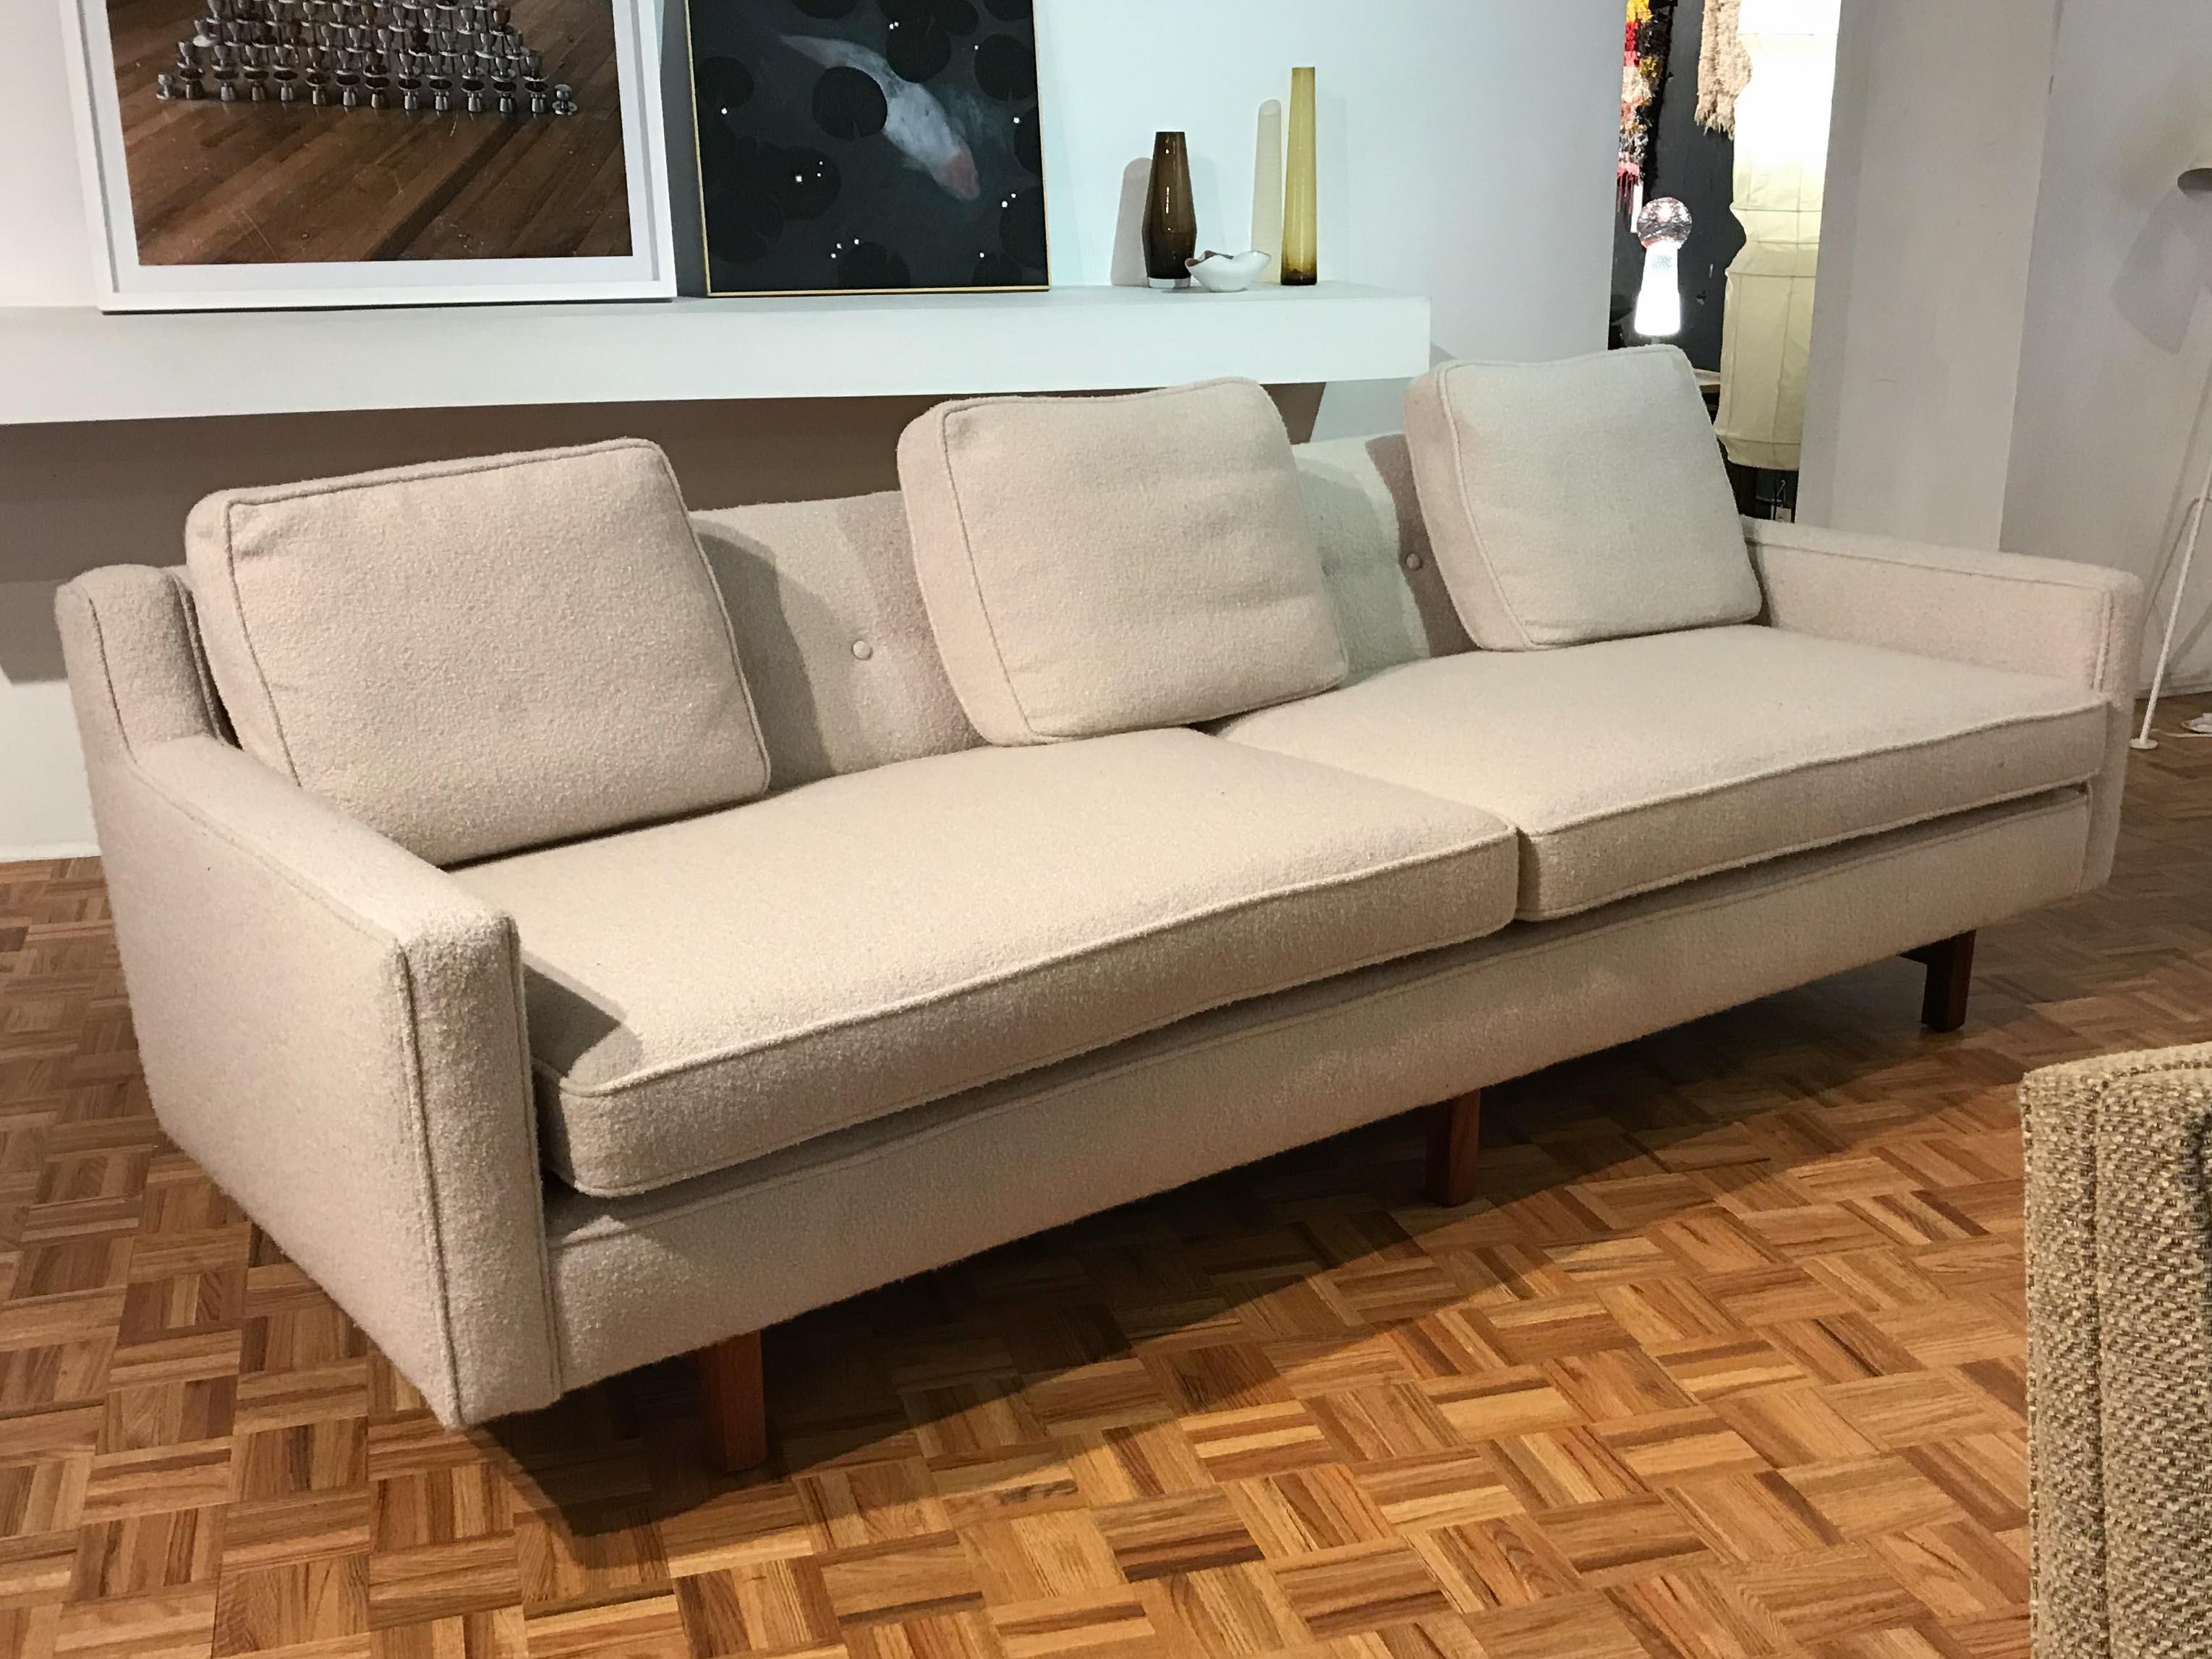 Beautiful midcentury sofa designed by Edward Wormley for Dunbar. Excellent vintage condition, frame is newly upholstered in period-correct fabric and rests on solid walnut legs. Includes a set of three throw cushions.